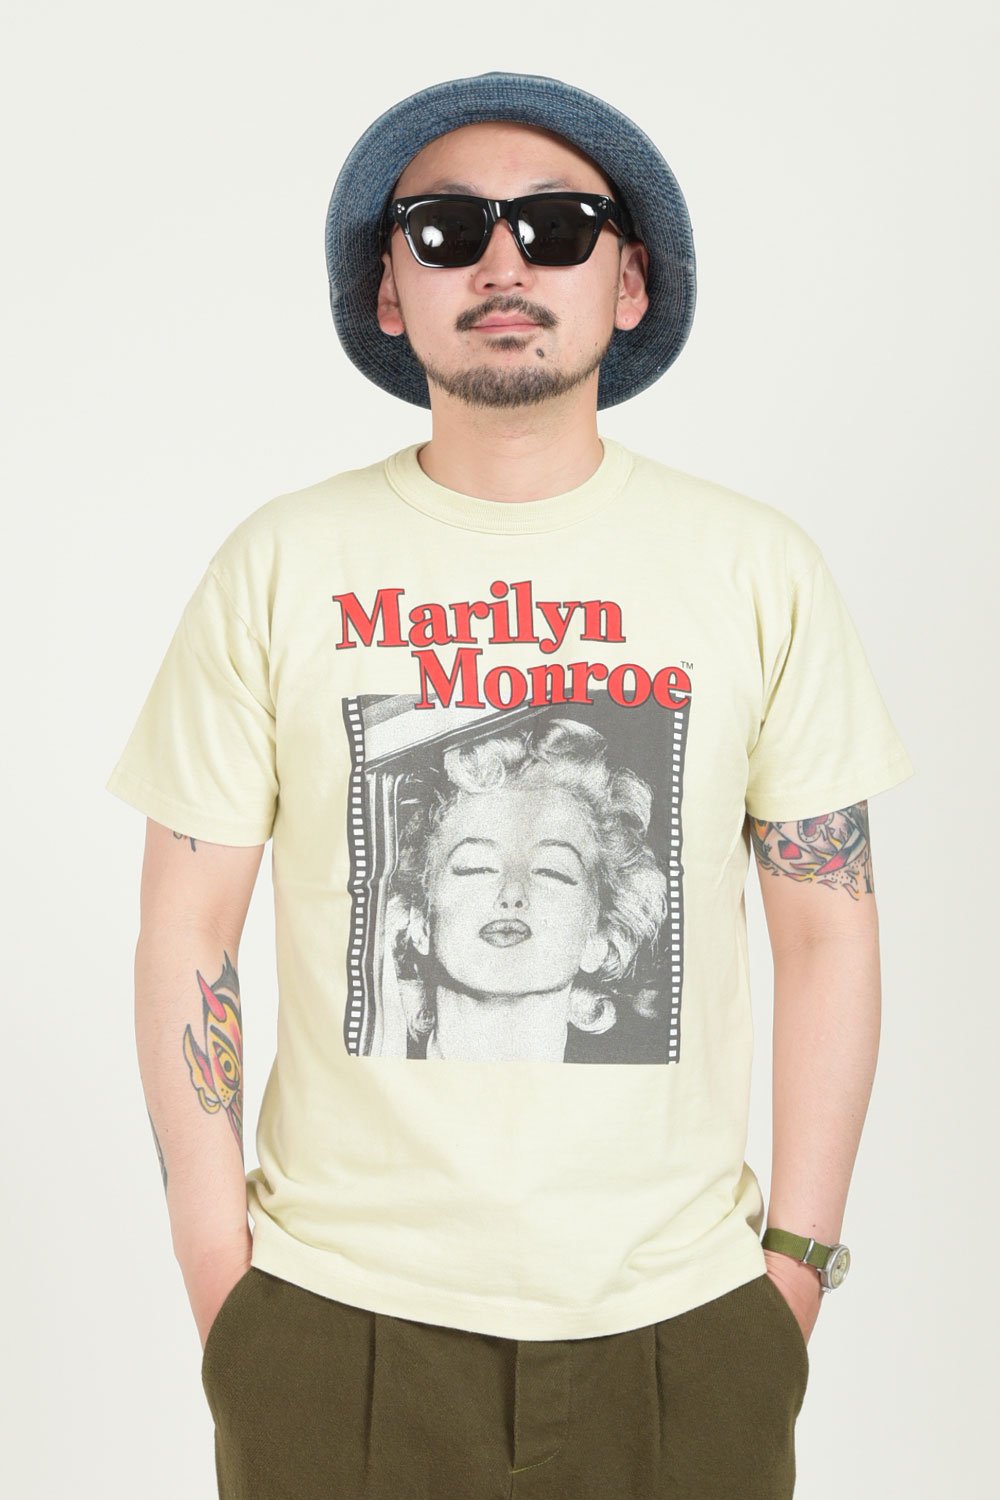 TOYS McCOY(トイズマッコイ) Tシャツ MARILYN MONROE TEE I WANNA BE LOVED BY YOU  TMC1920 通販正規取扱 | ハーレムストア